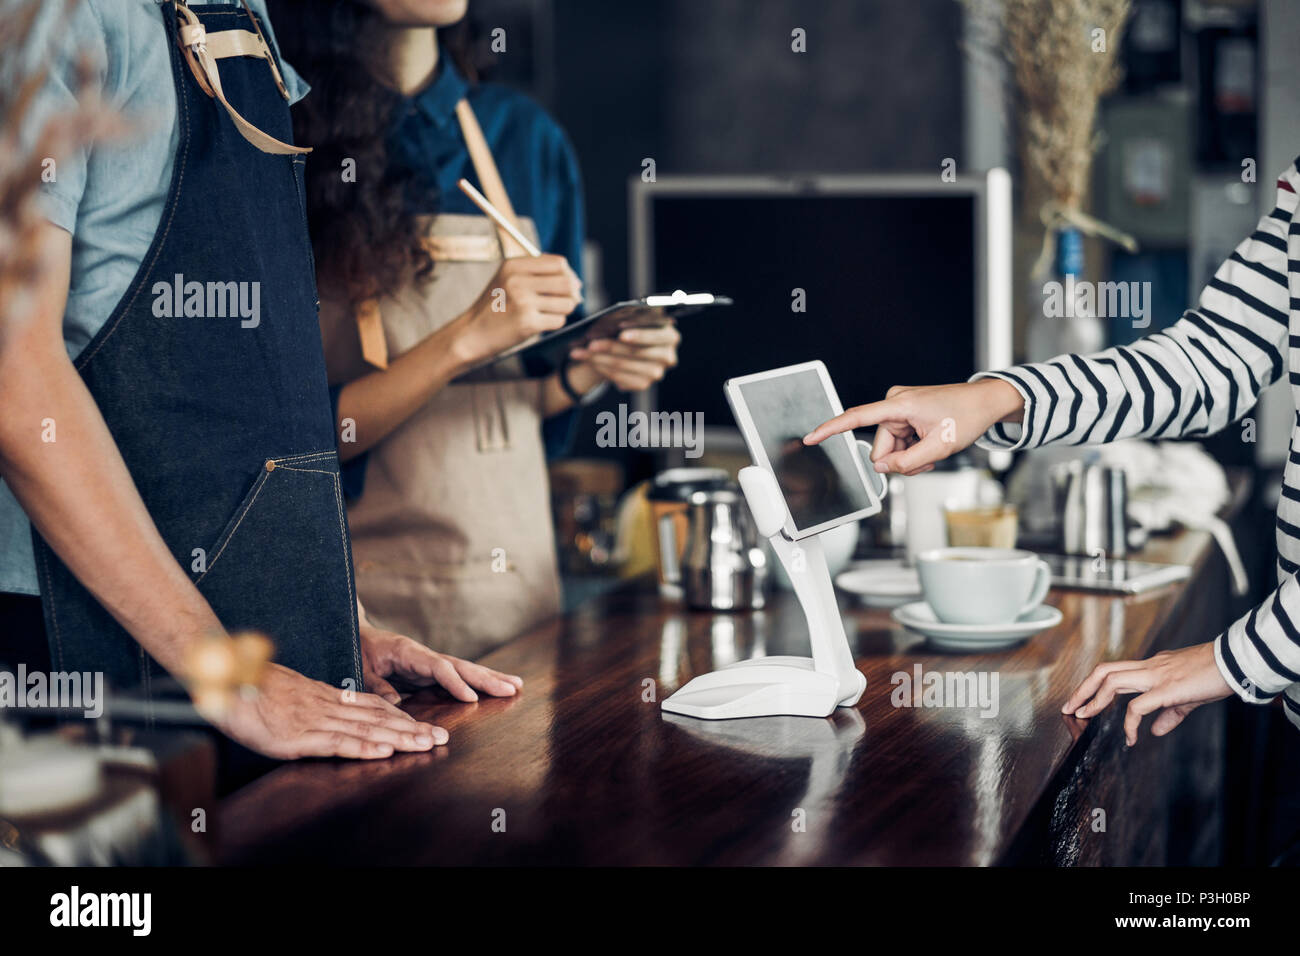 customer self service order drink menu with tablet screen at cafe counter bar,seller coffee shop accept payment by mobile.digital lifestyle concept.Bl Stock Photo